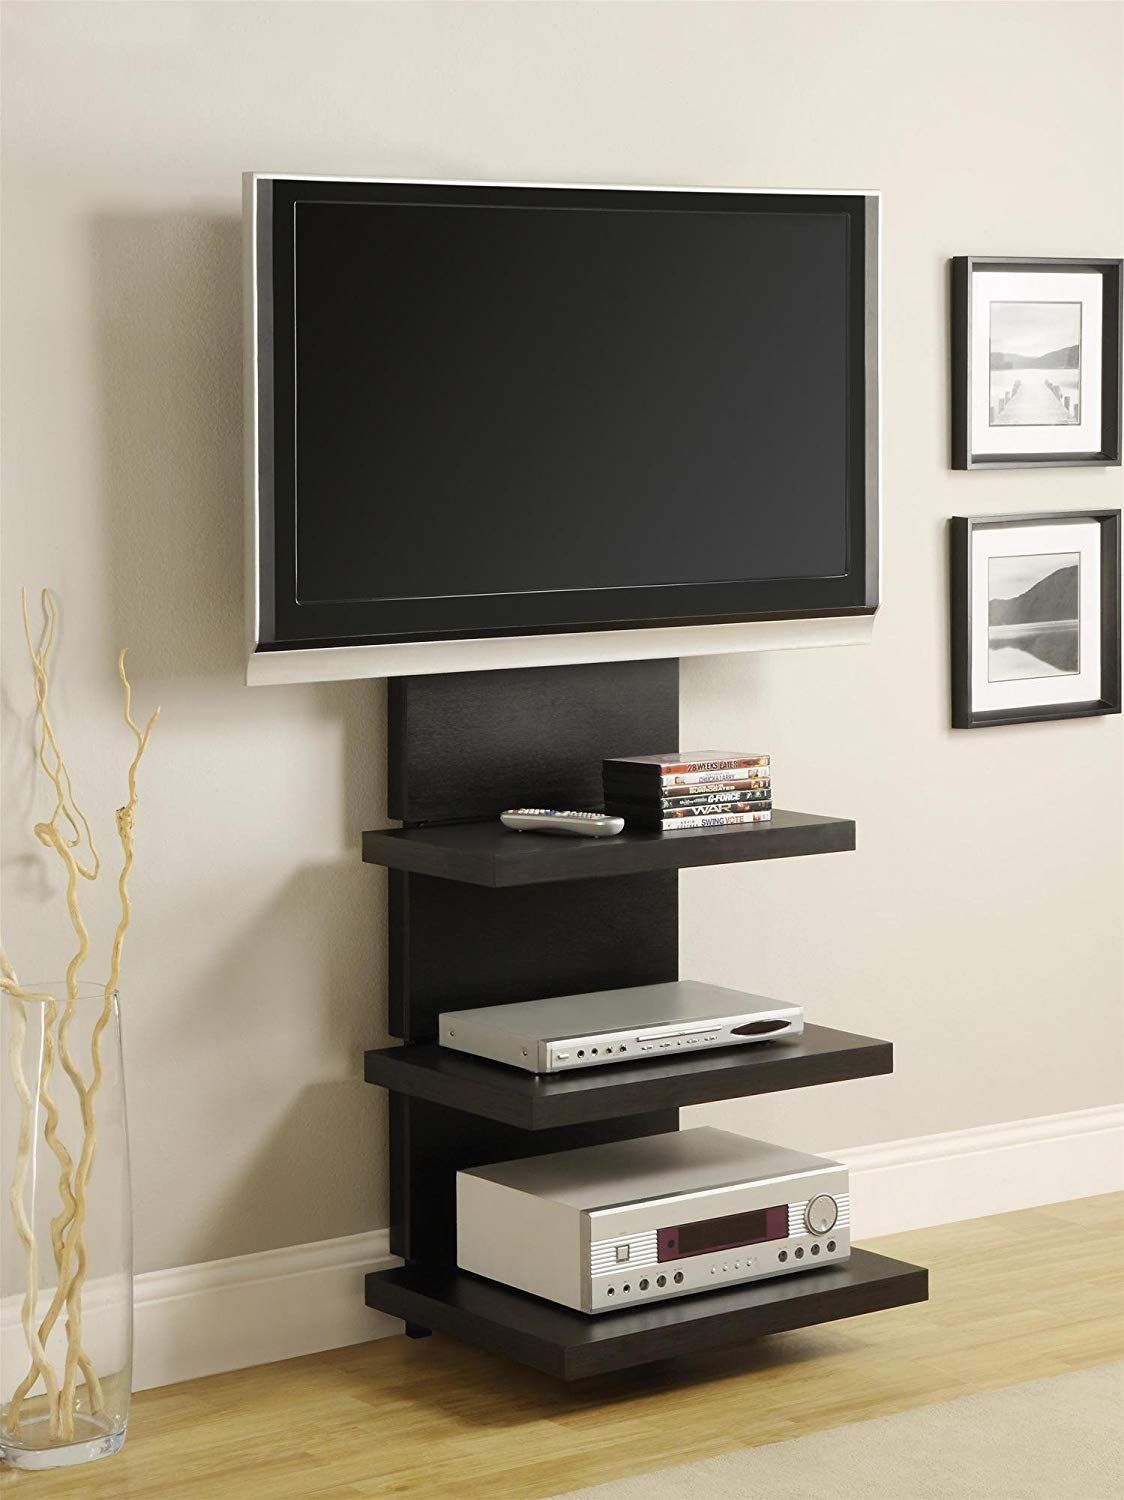 60 Best Diy Tv Stand Ideas For Your Room Interior For Diy Convertible Tv Stands And Bookcase (View 3 of 15)